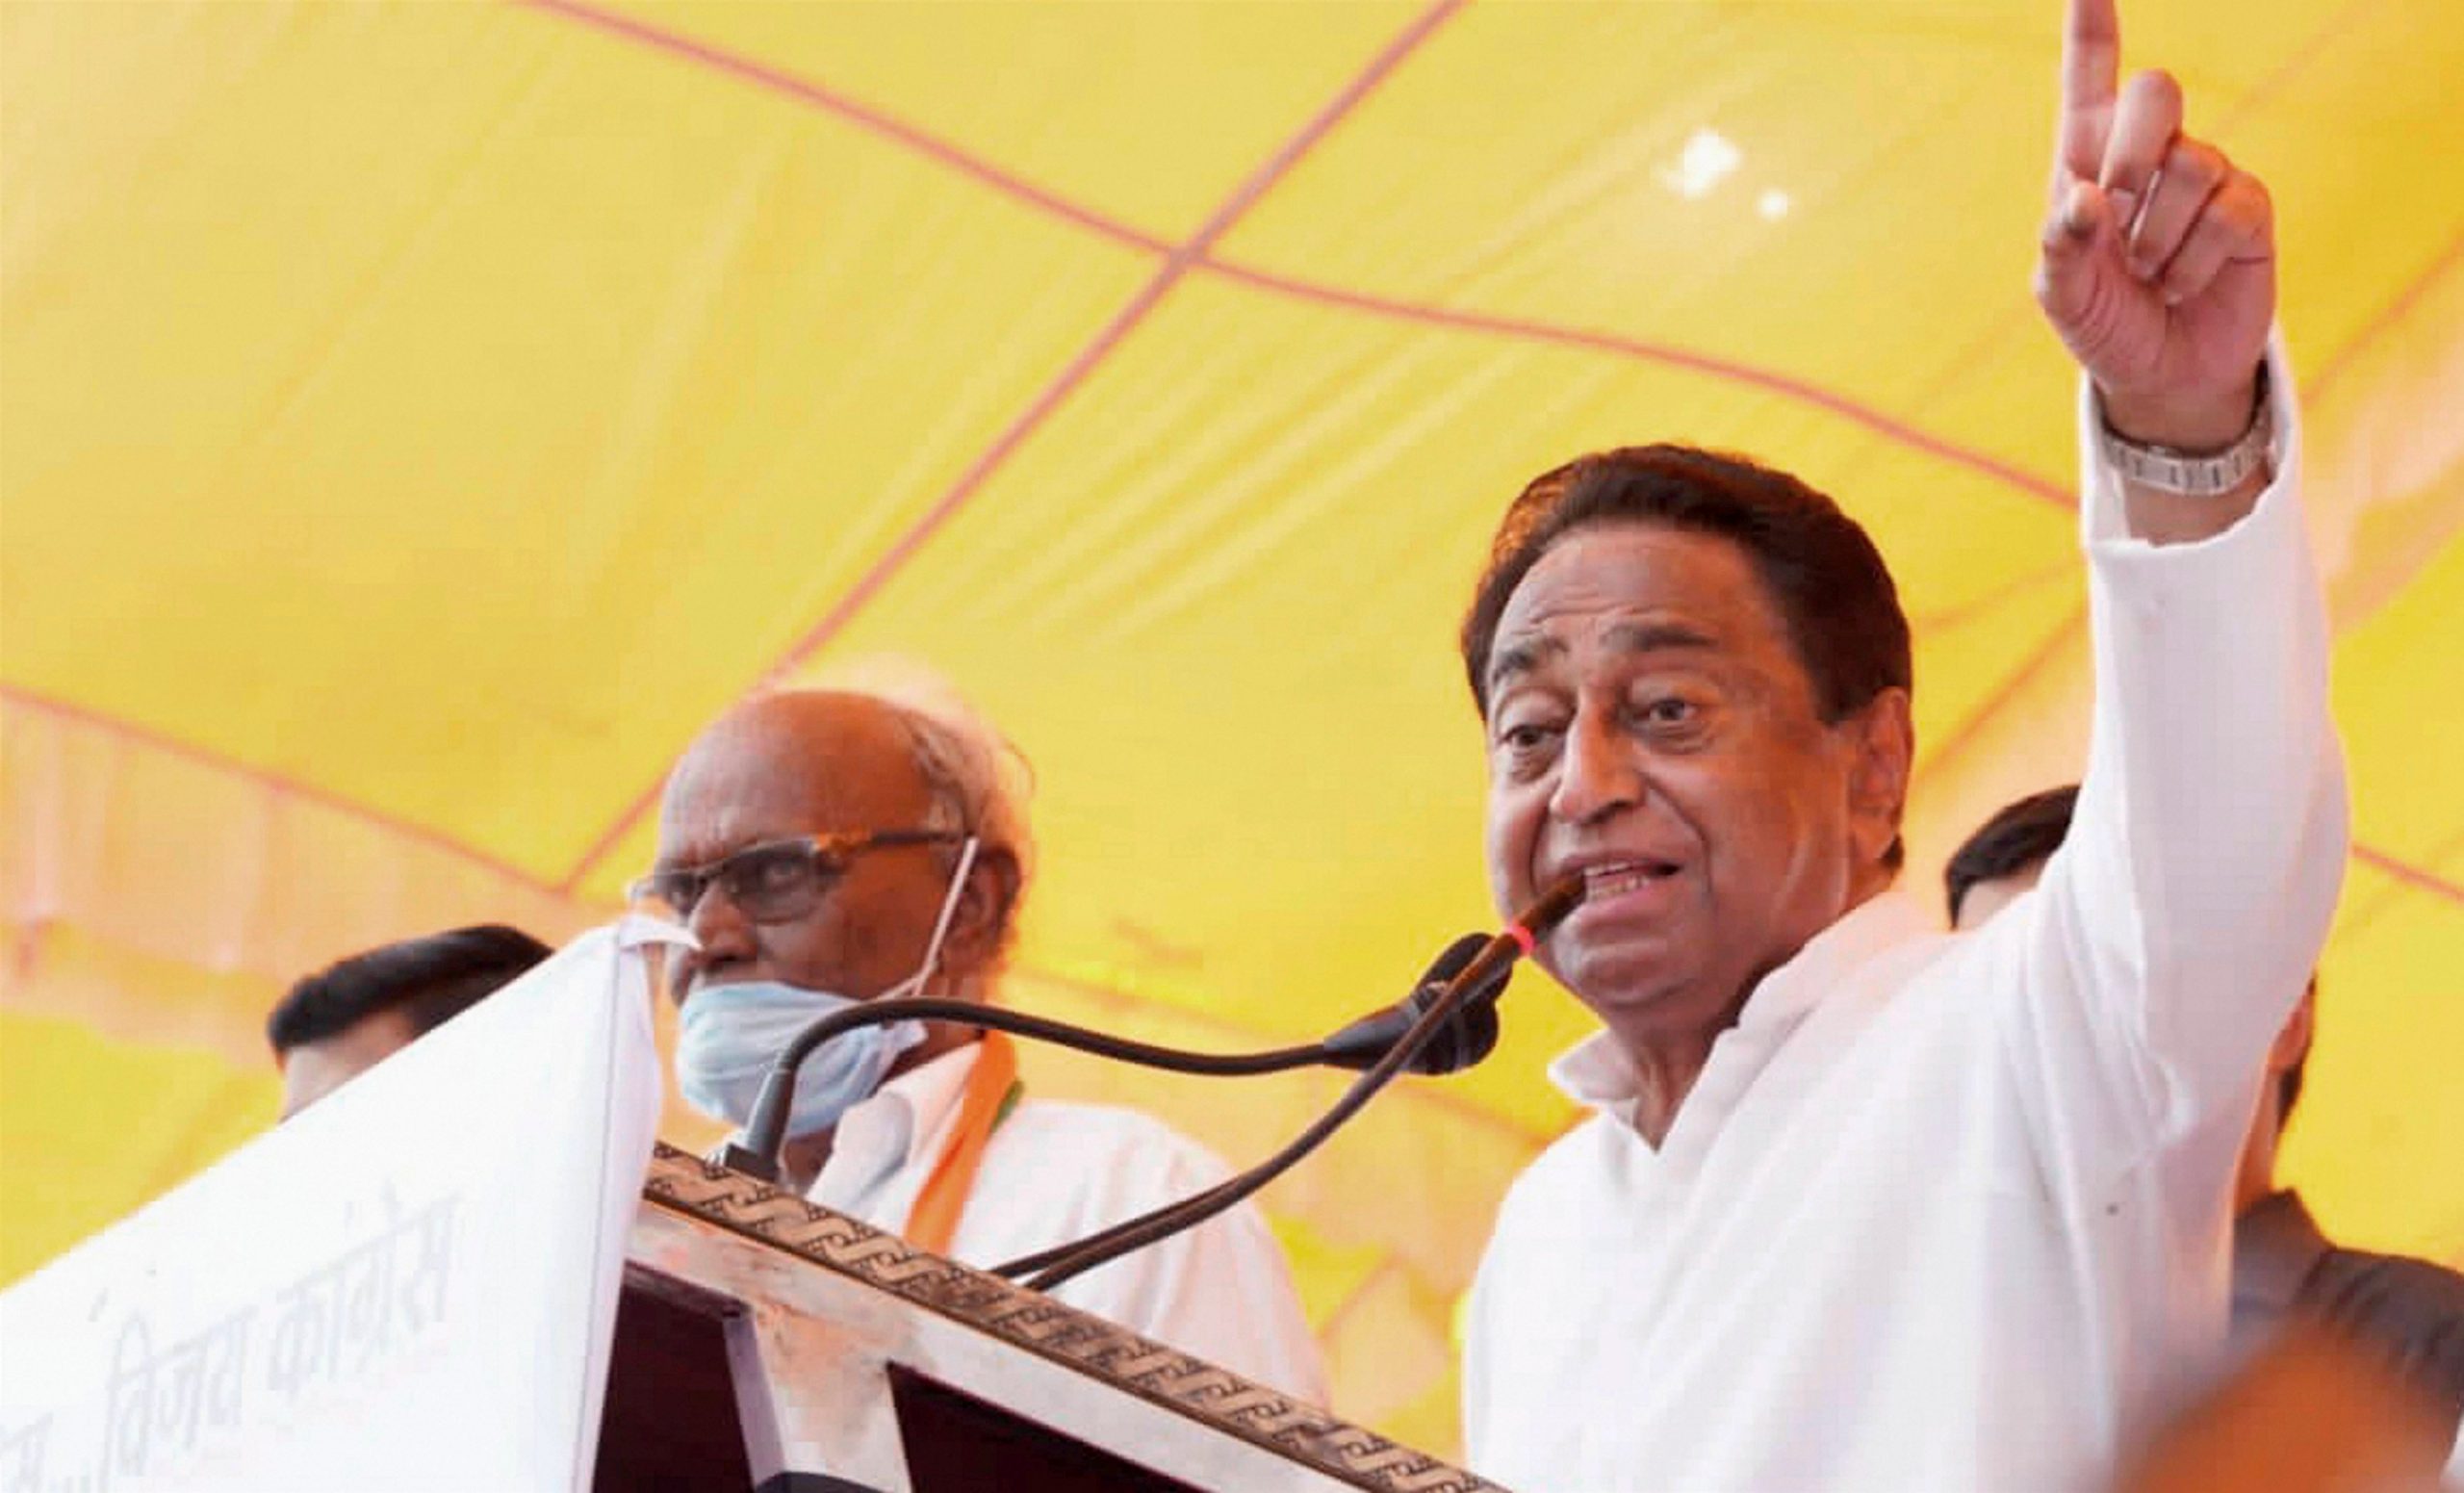 EC issues notice to Kamal Nath over ‘item’ remark